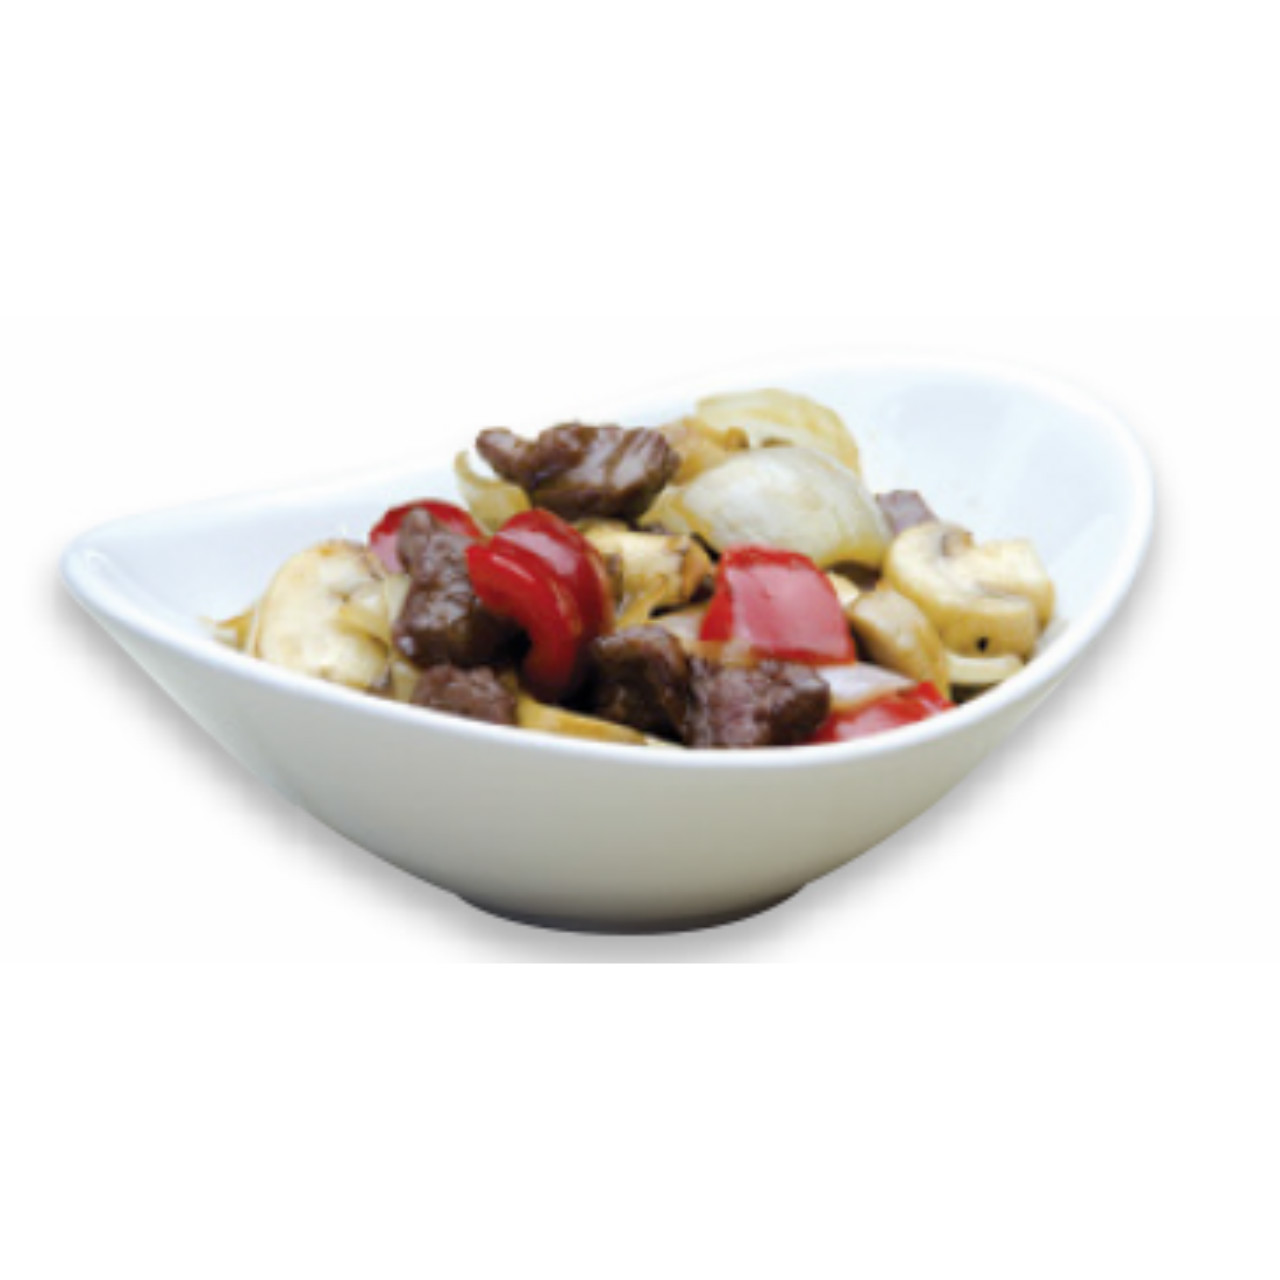 Stir-fried diced beef fillet w/ assorted mushrooms in maggi sauce